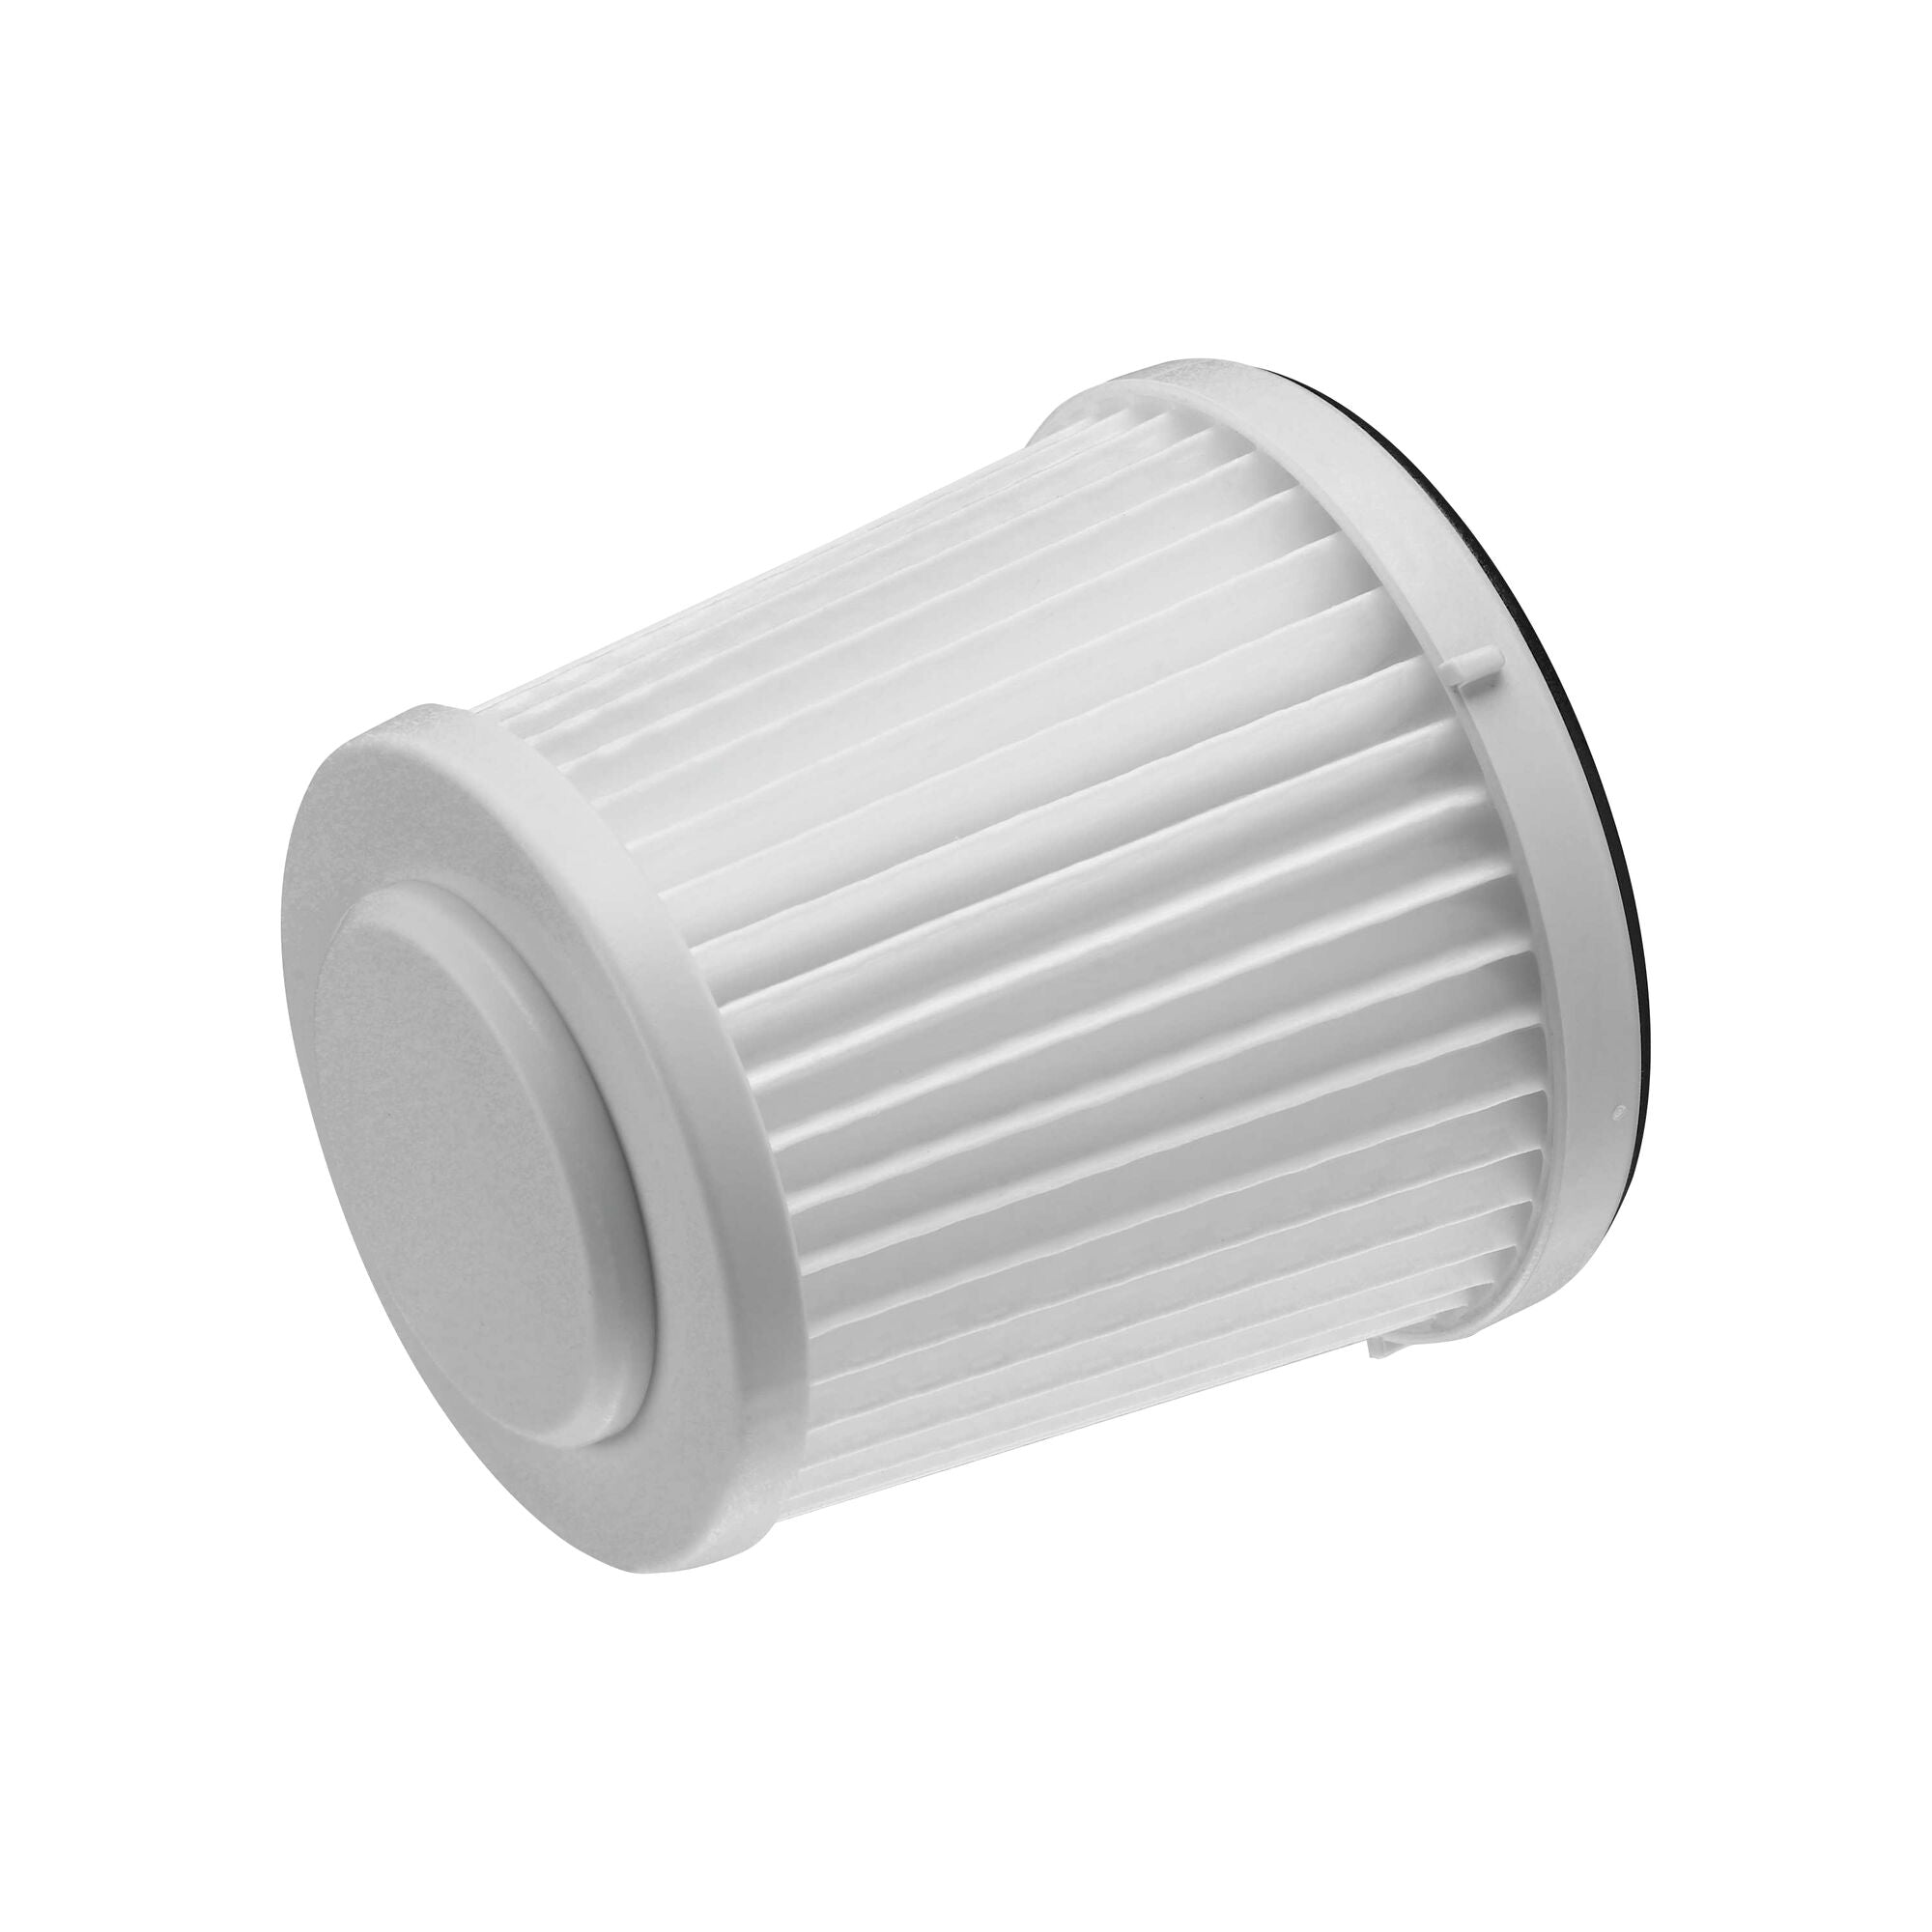 Black and Decker Dustbuster Filter Assembly